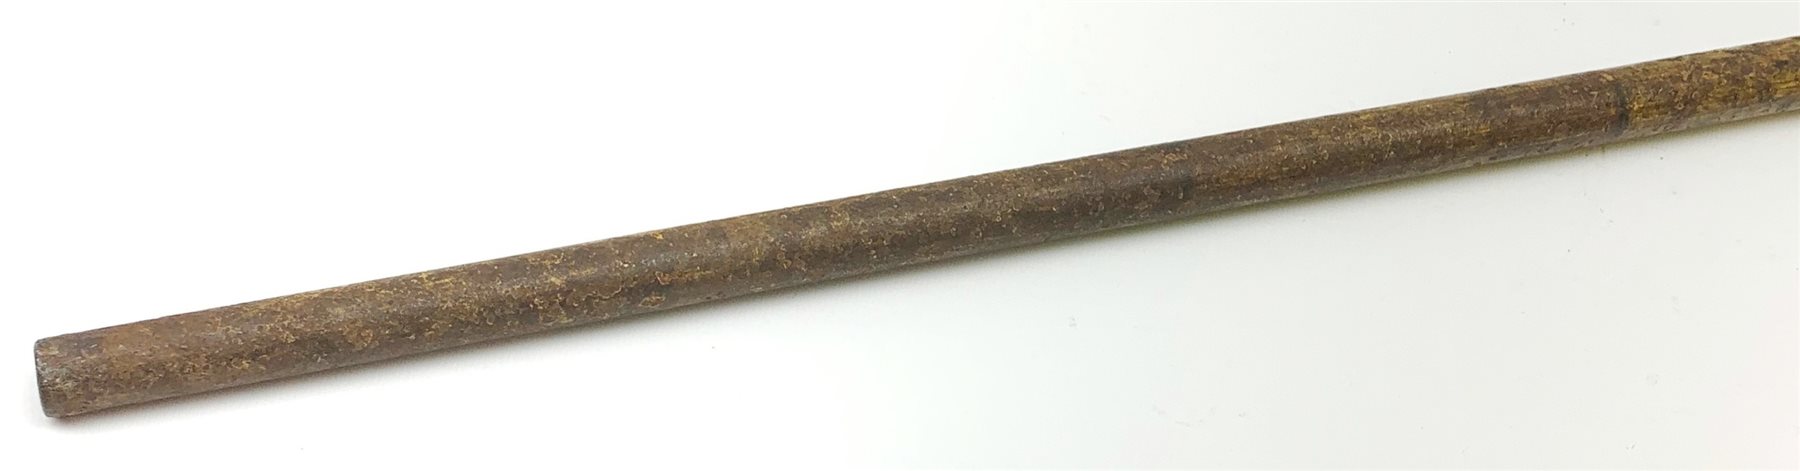 Mid-19th century all steel muzzle loading percussion cap walking stick shotgun, approximate calibre - Image 3 of 5